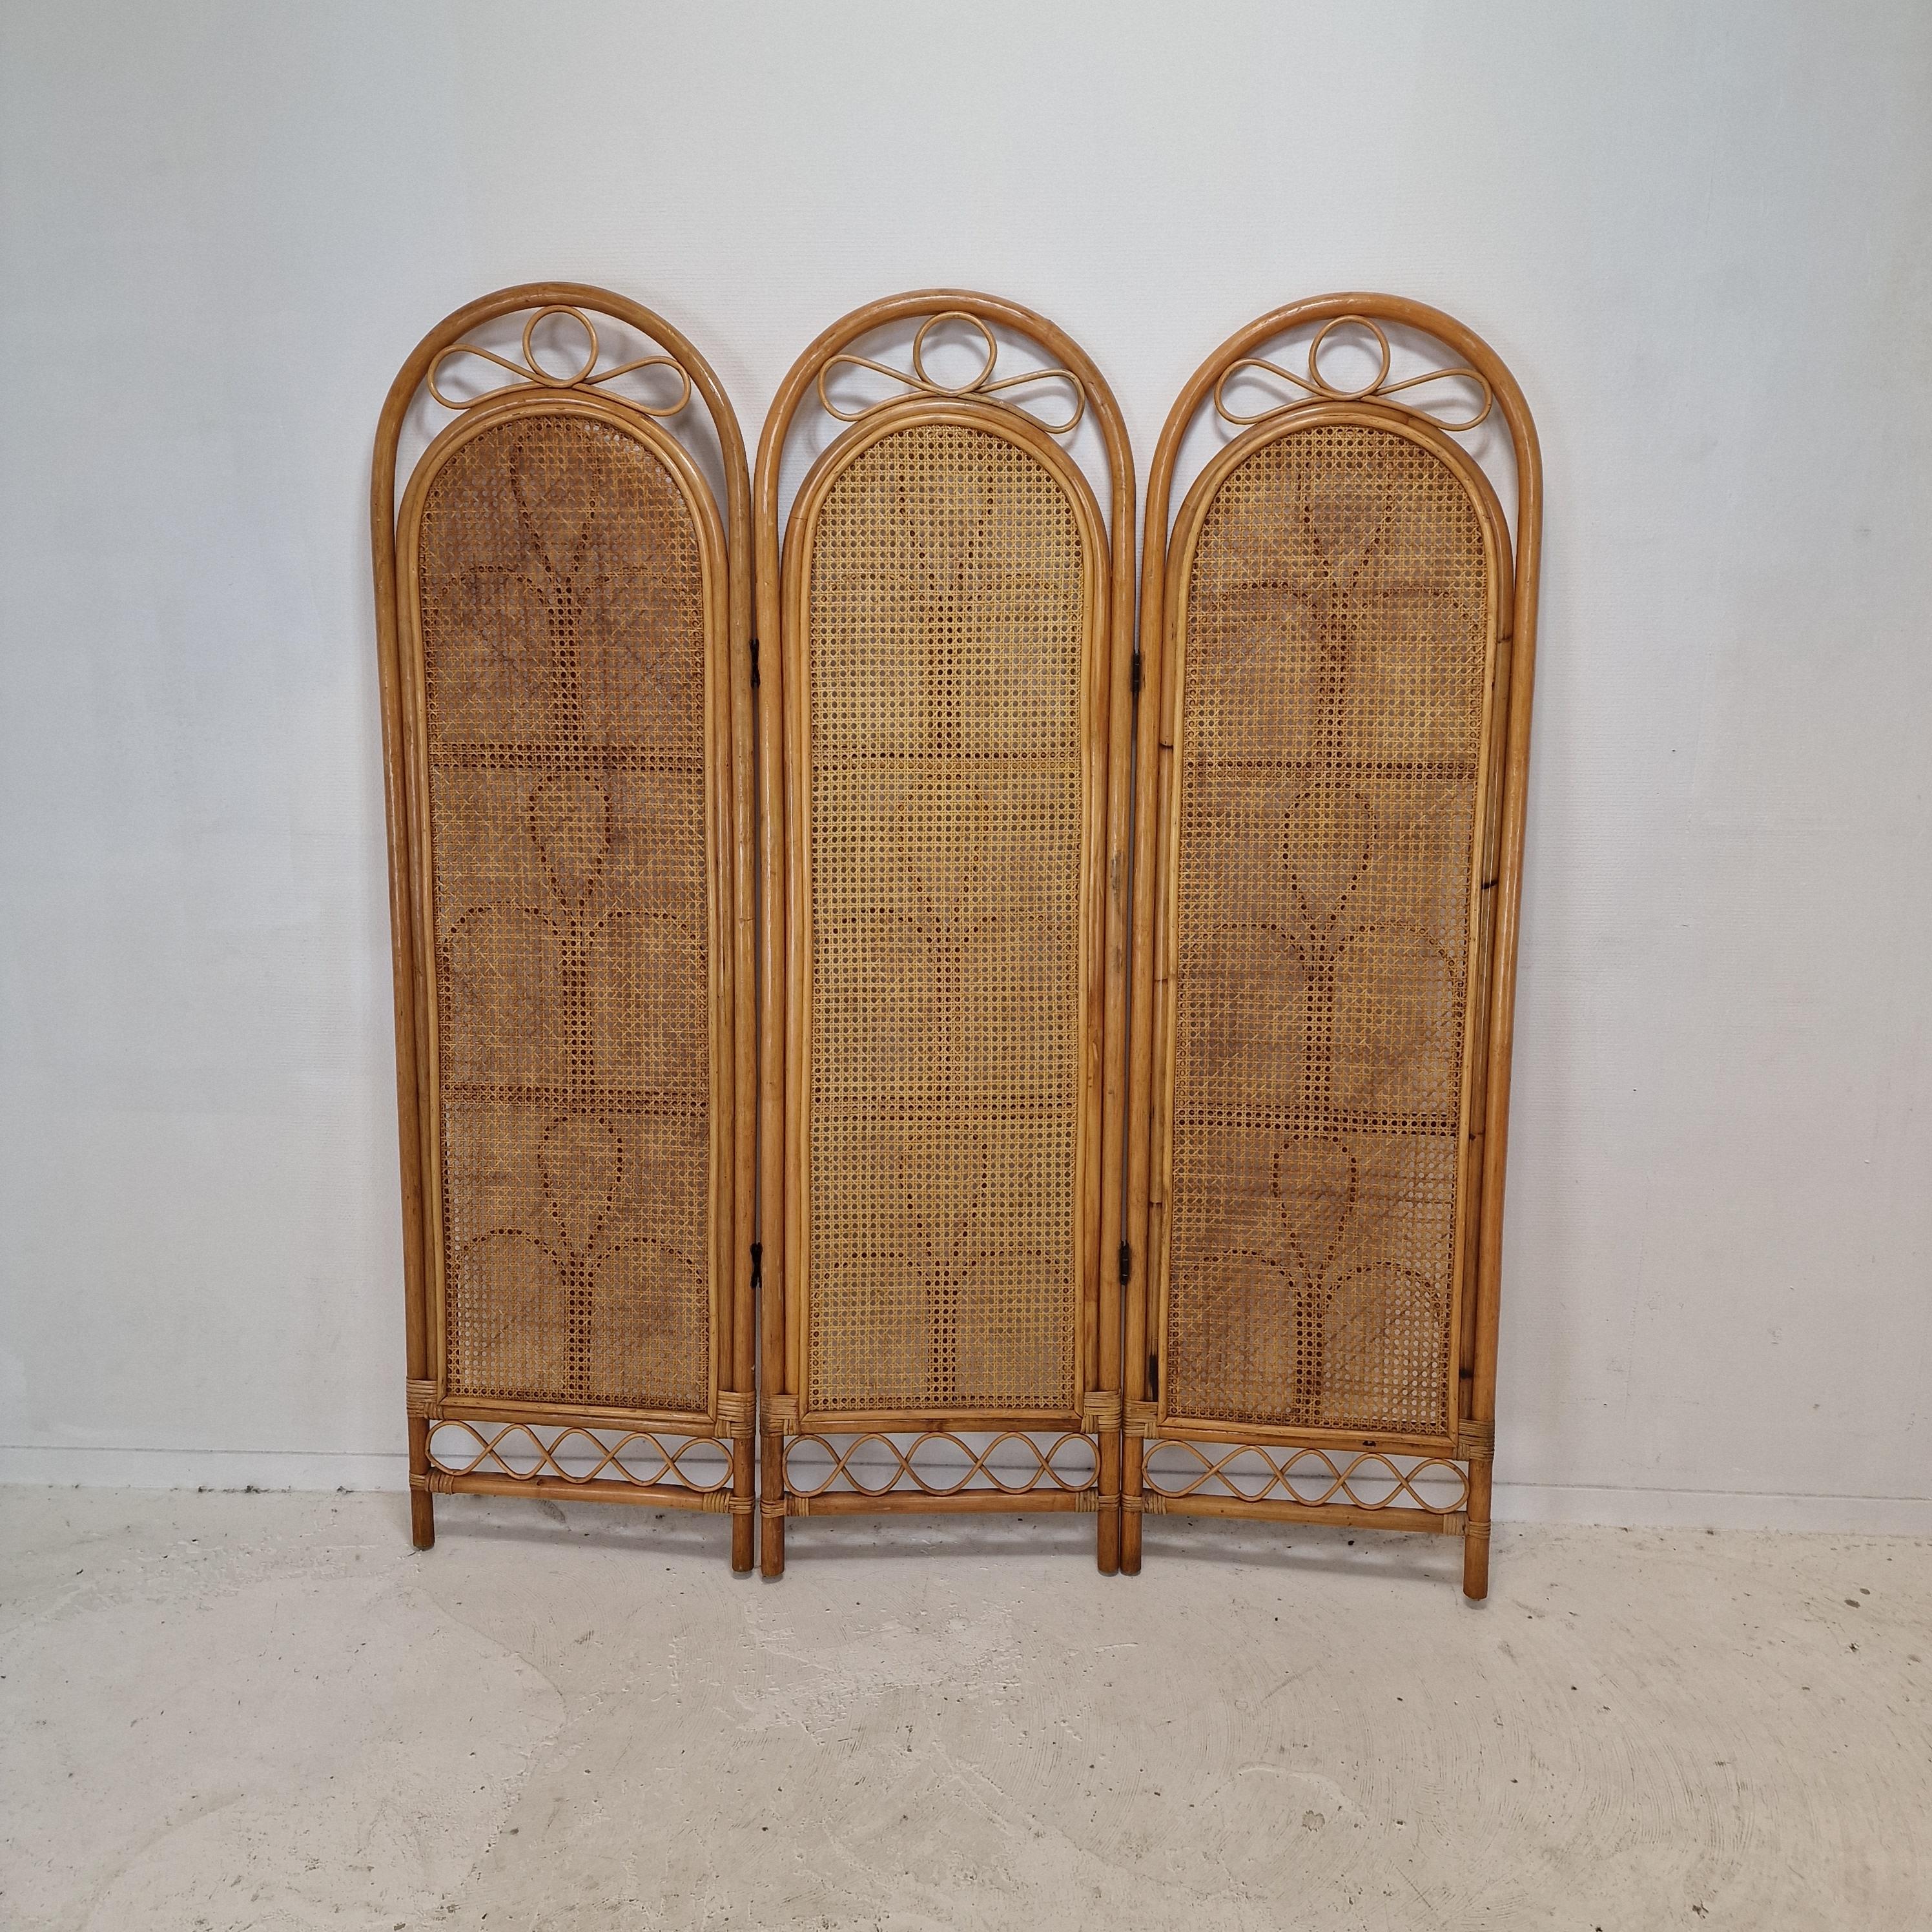 Italian Room Divider in Rattan and Wicker, 1960s For Sale 4